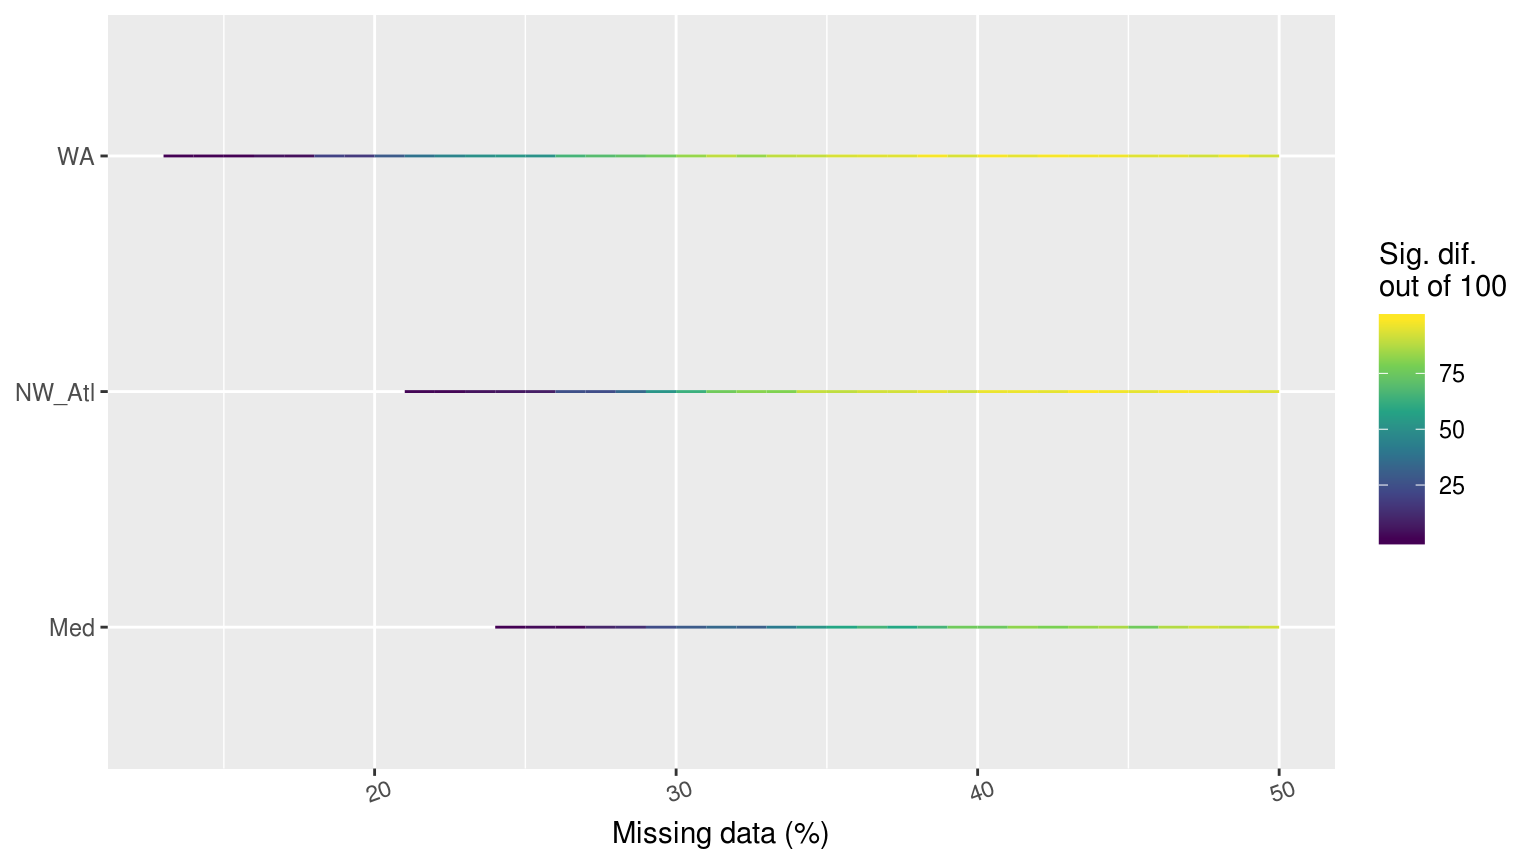 Line graph showing the count of times out of 100 random replicates when a given percentage of missing data led to significant differences in the count of categories of MHWs as determined by a _chi_-squared test.